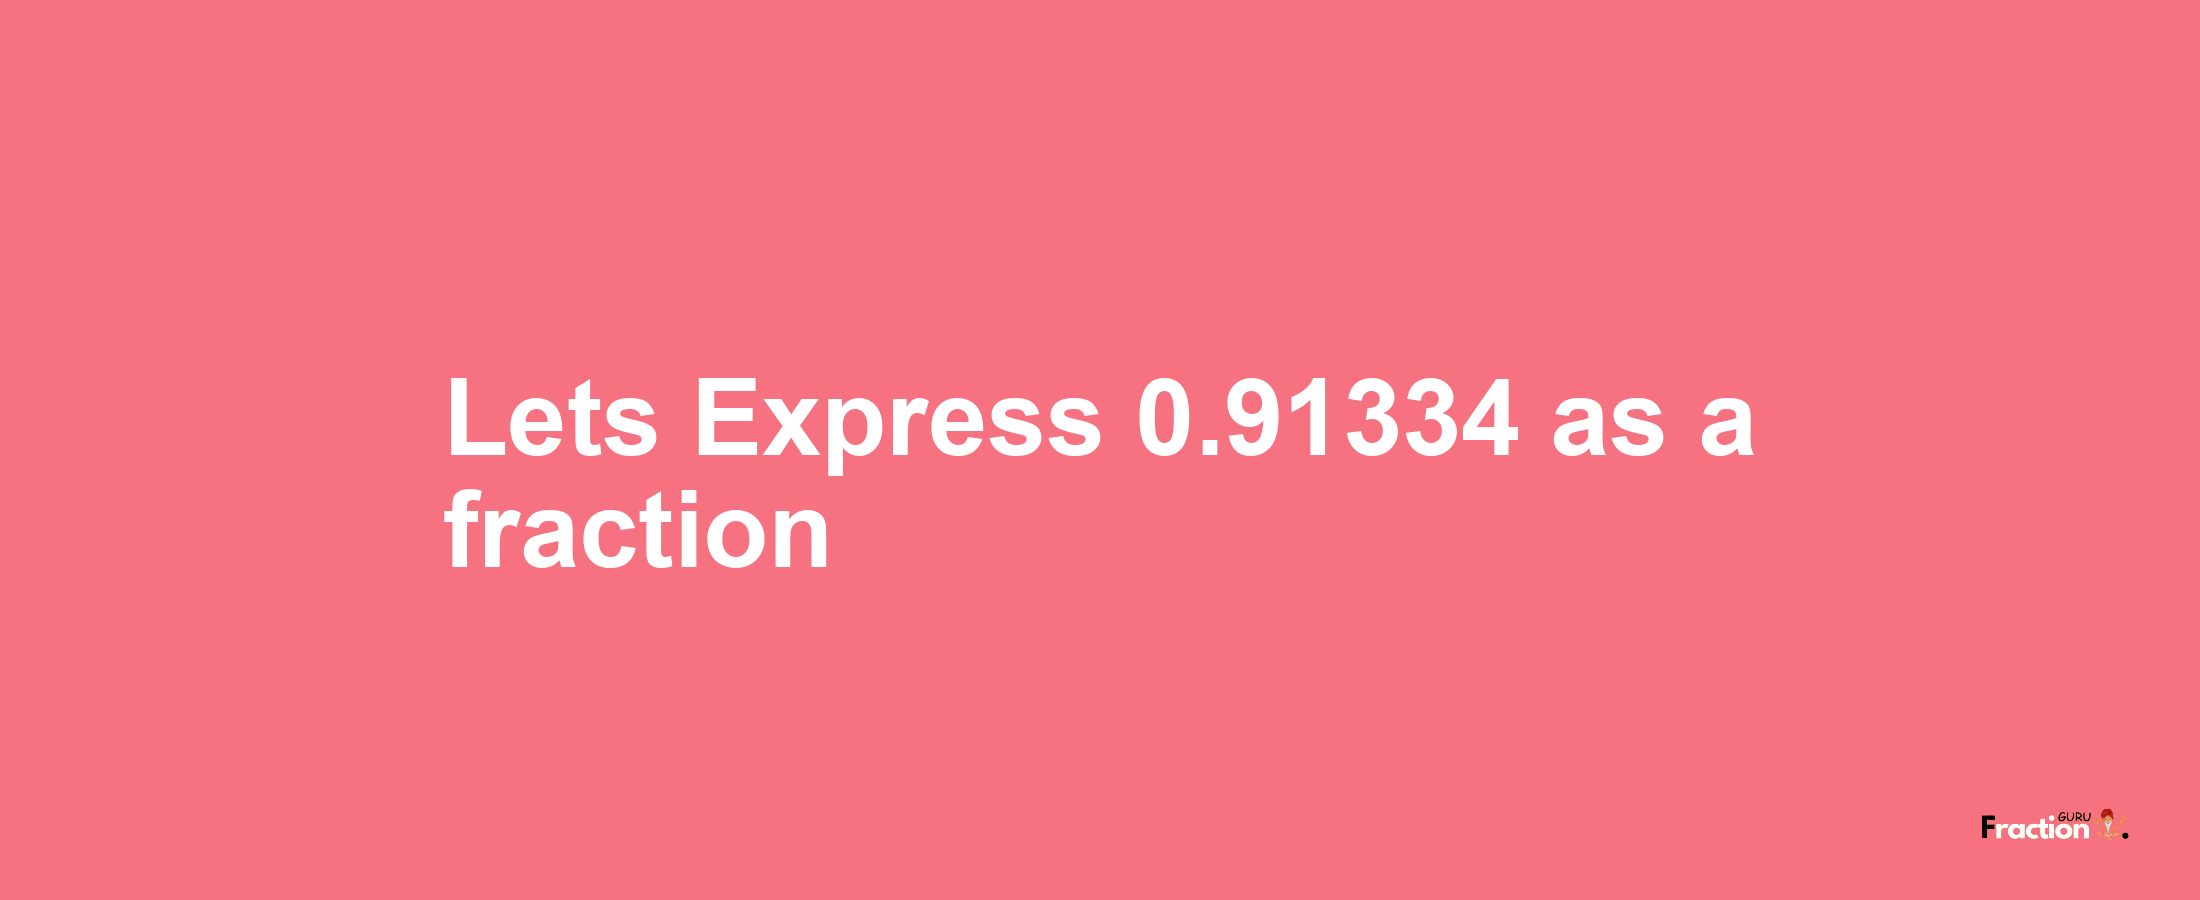 Lets Express 0.91334 as afraction